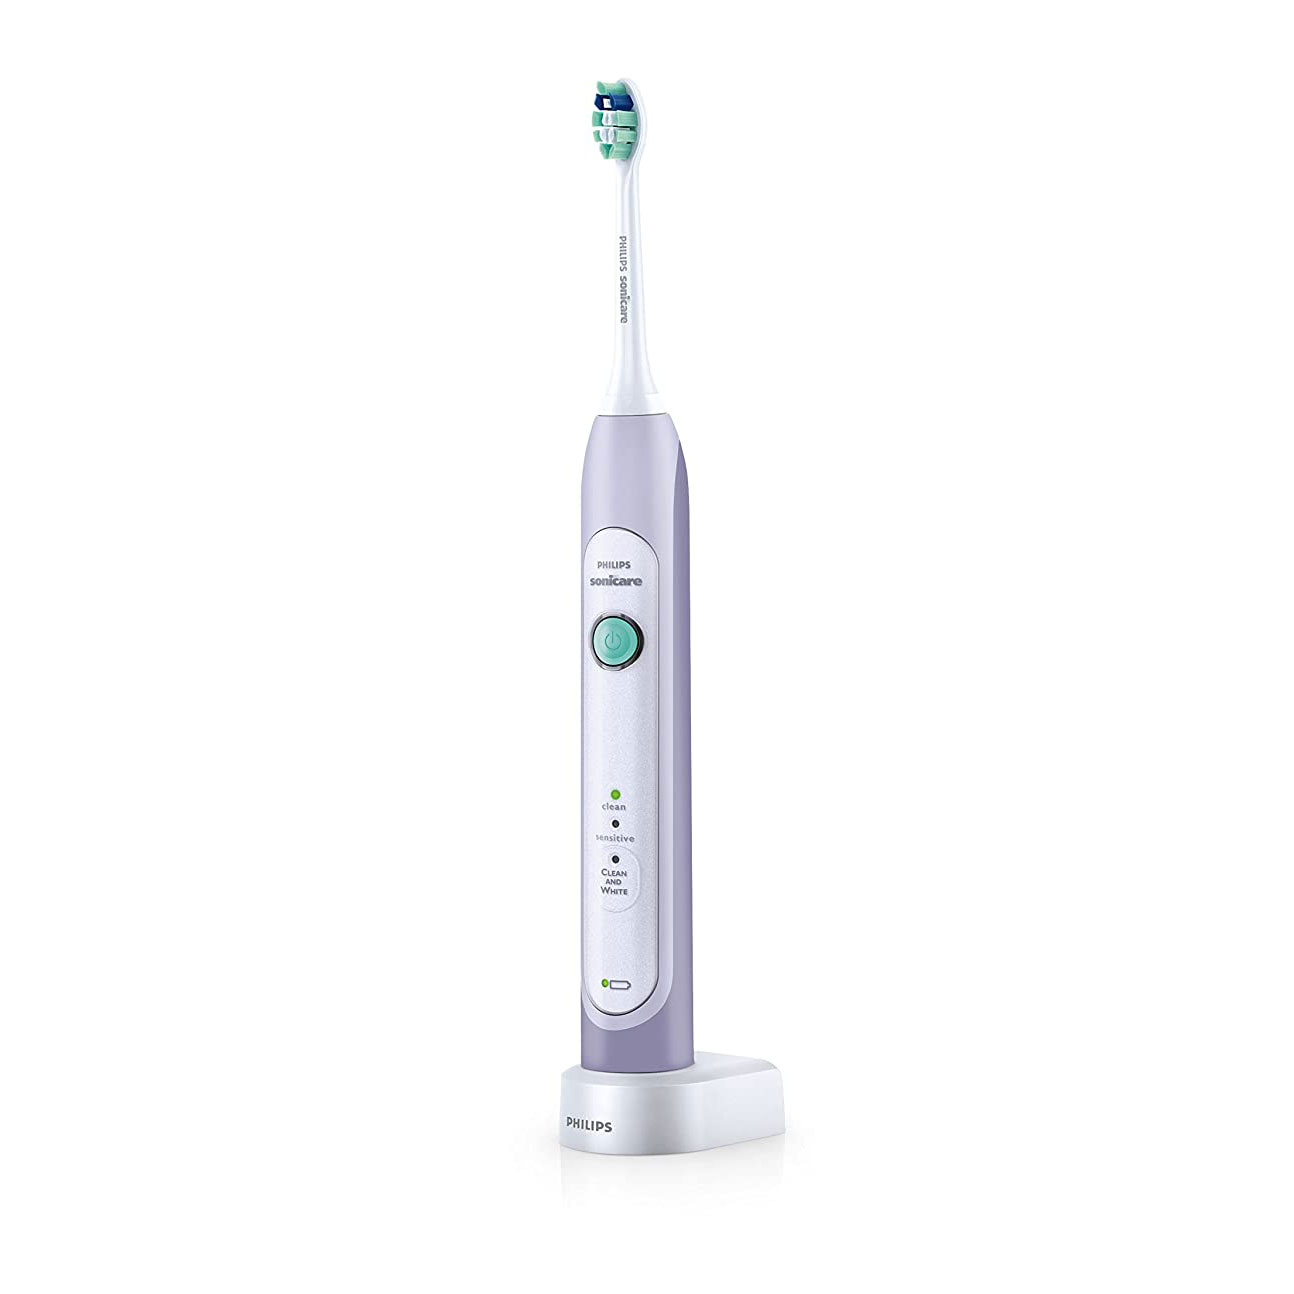 Philips Sonicare HealthyWhite Sonic Electric Rechargeable Toothbrush, Lavender - image 3 of 4